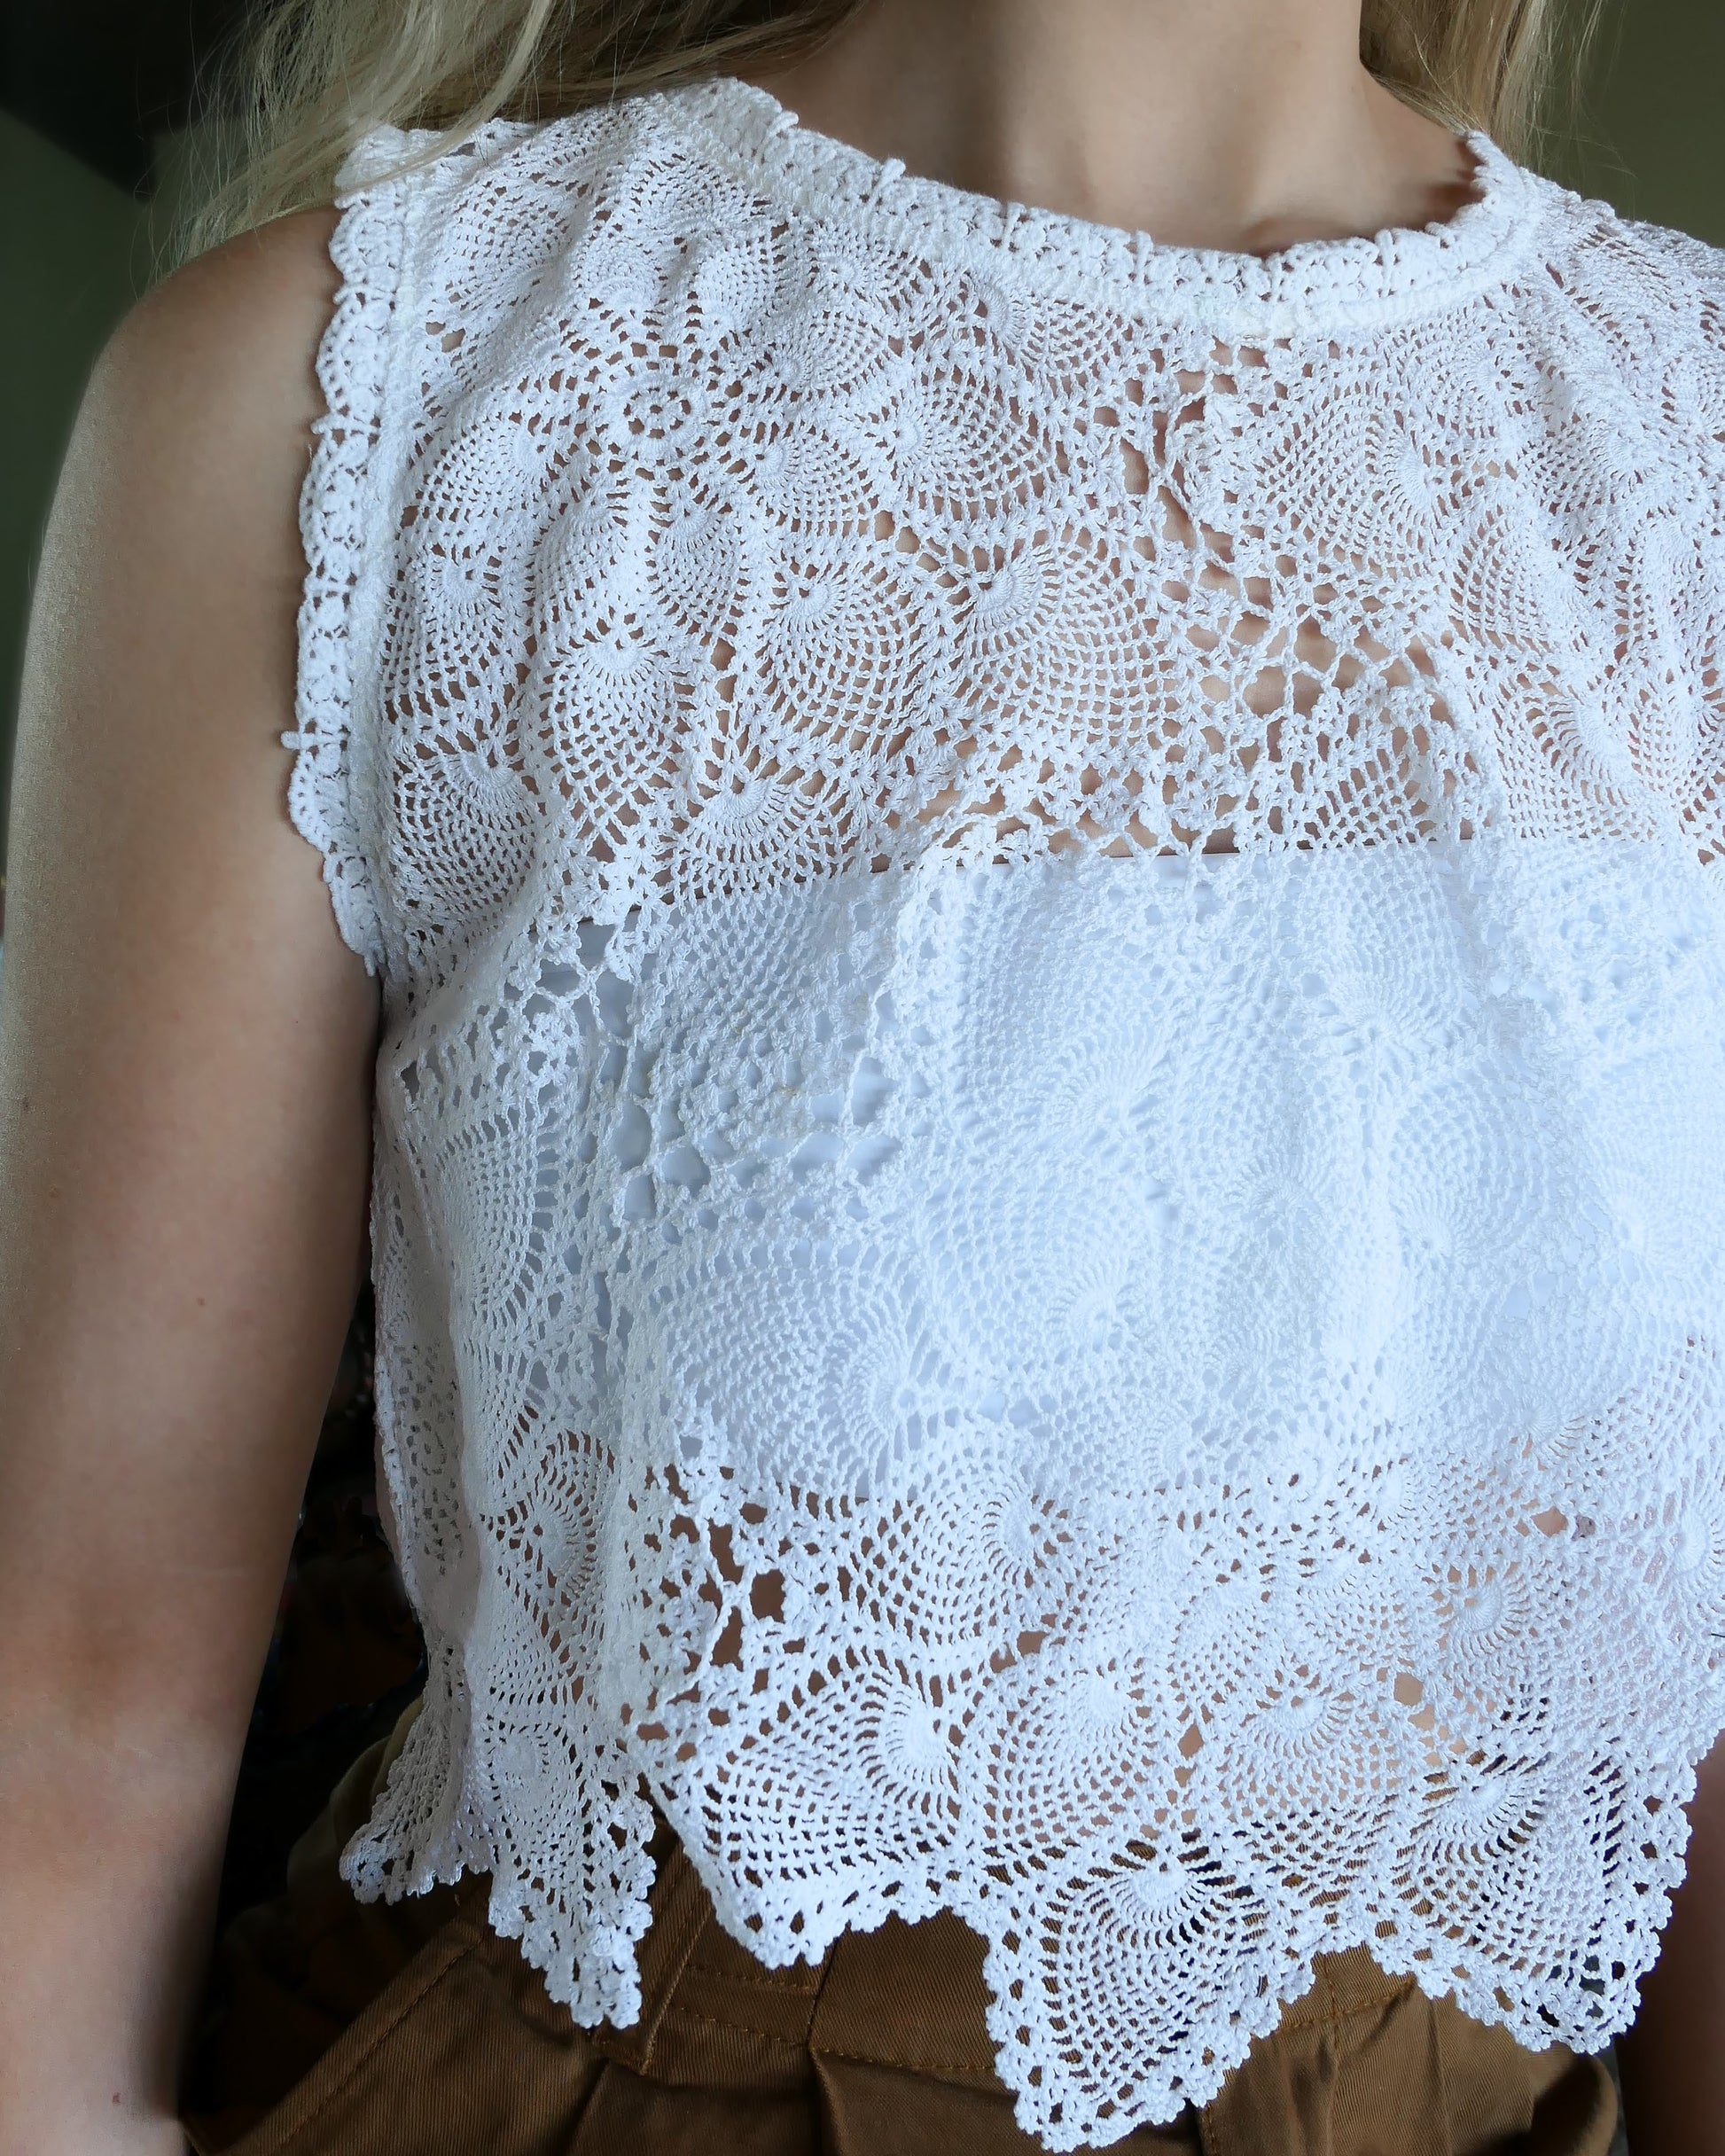 Closeup shot of crop tank top. An ultra casual, hip, and boho-chic crop tank top made with interconnected flower doilies reminiscent of the white lotus, which symbolizes peace, tranquility, and calmness.  Lace trim at the collar and sleeve. 